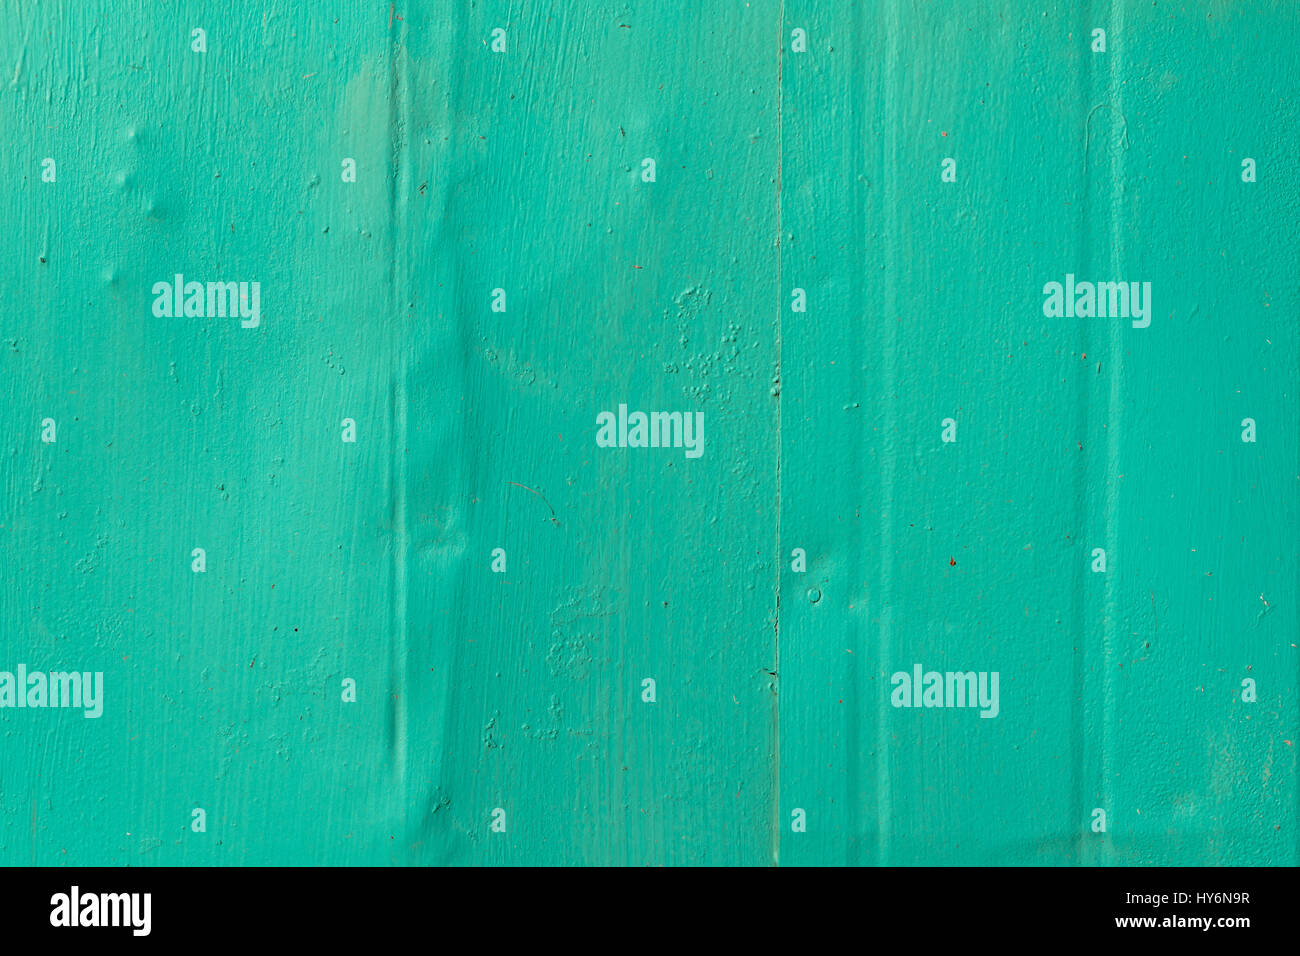 Blue colored stained metal wall texture pattern. Stock Photo